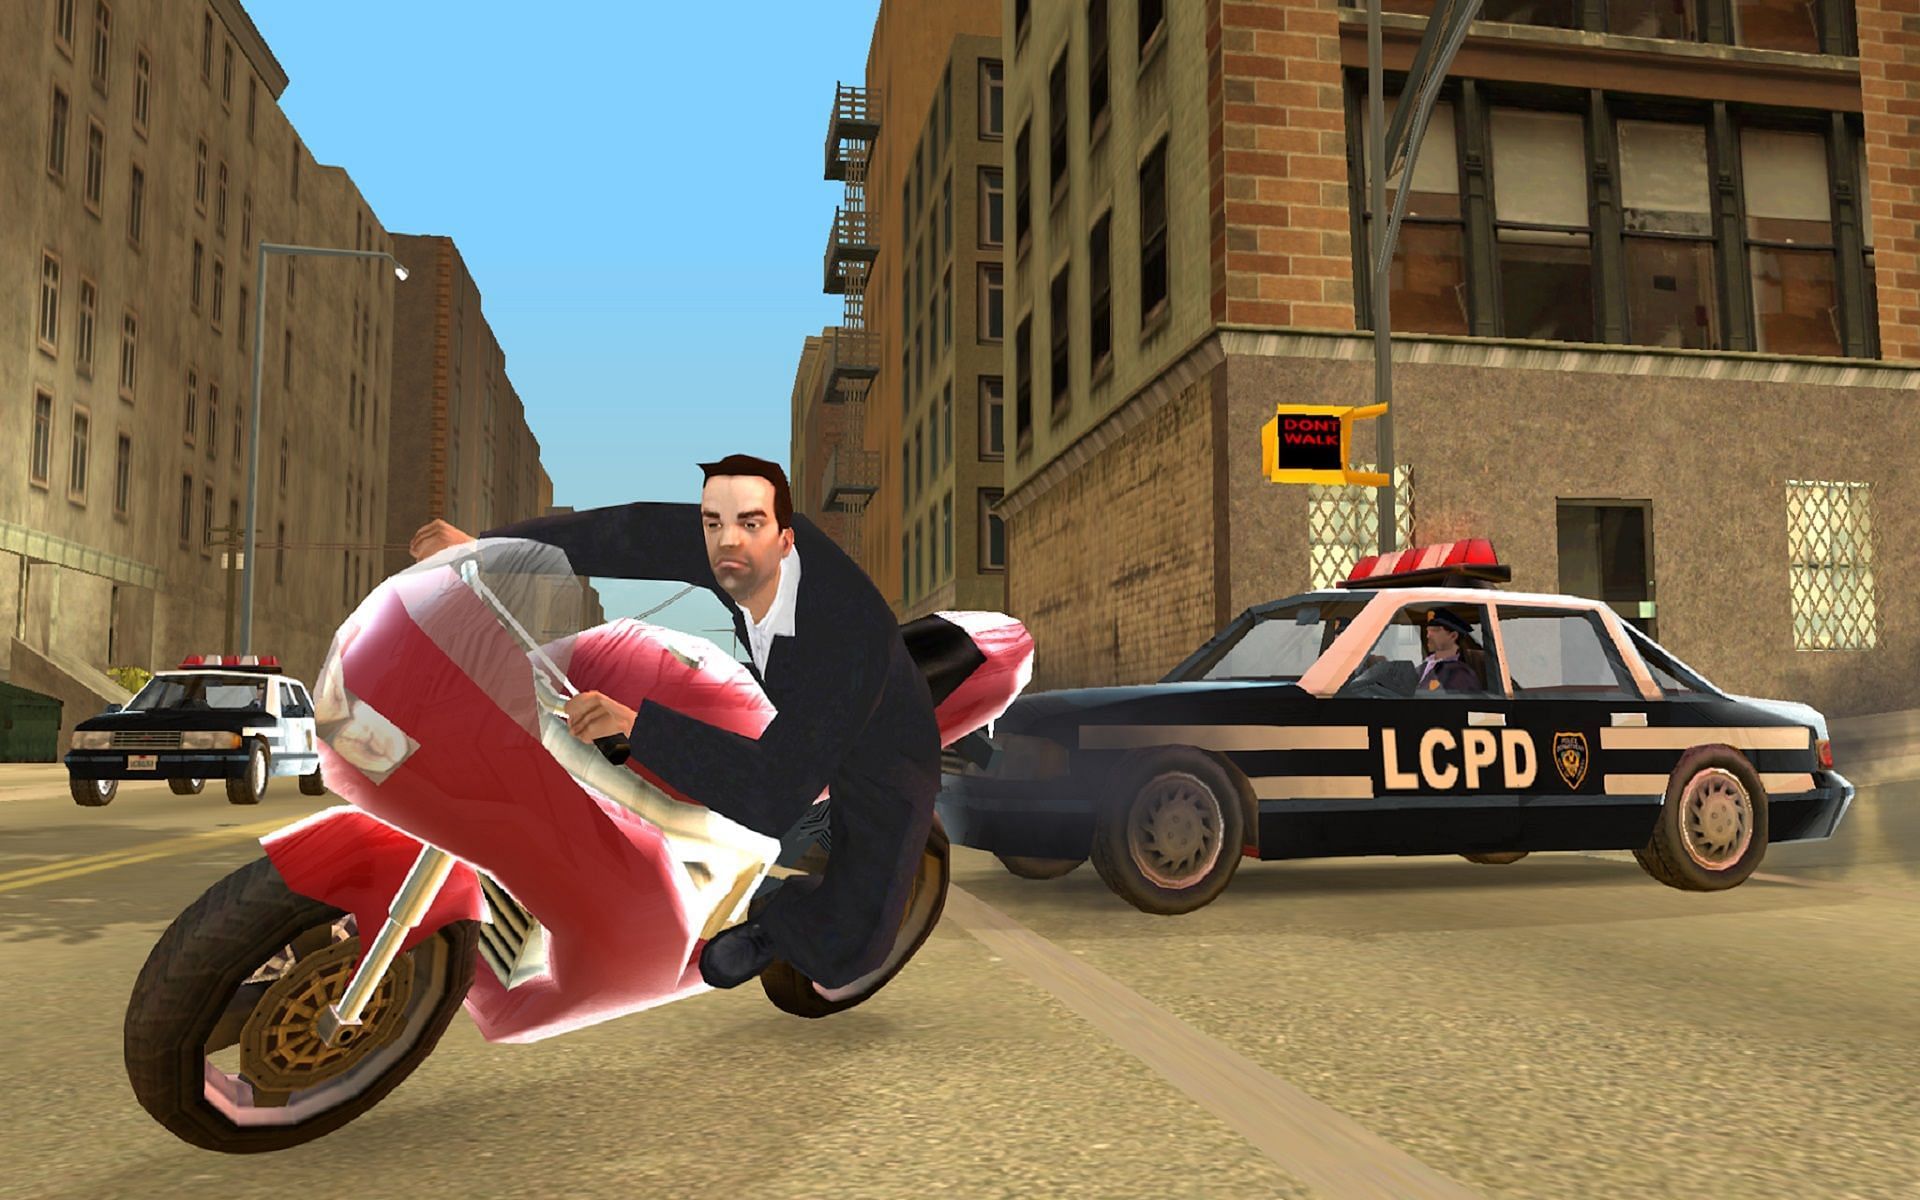 Gta games android